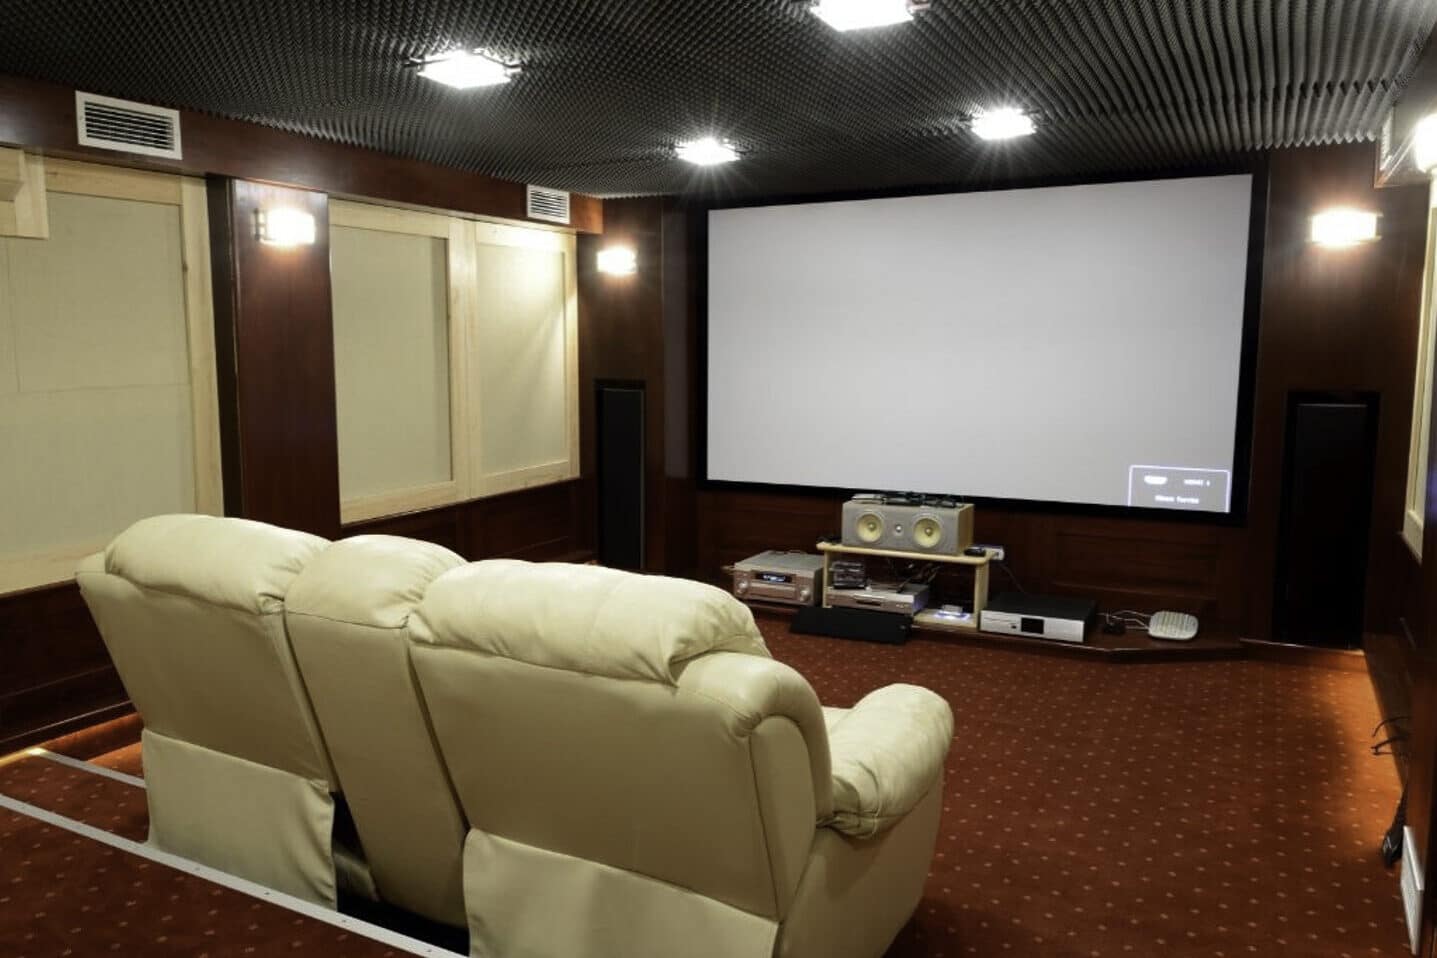 This home owner had Allied Remodeling Contractors finish the basement of their home and turn it into a home theater.